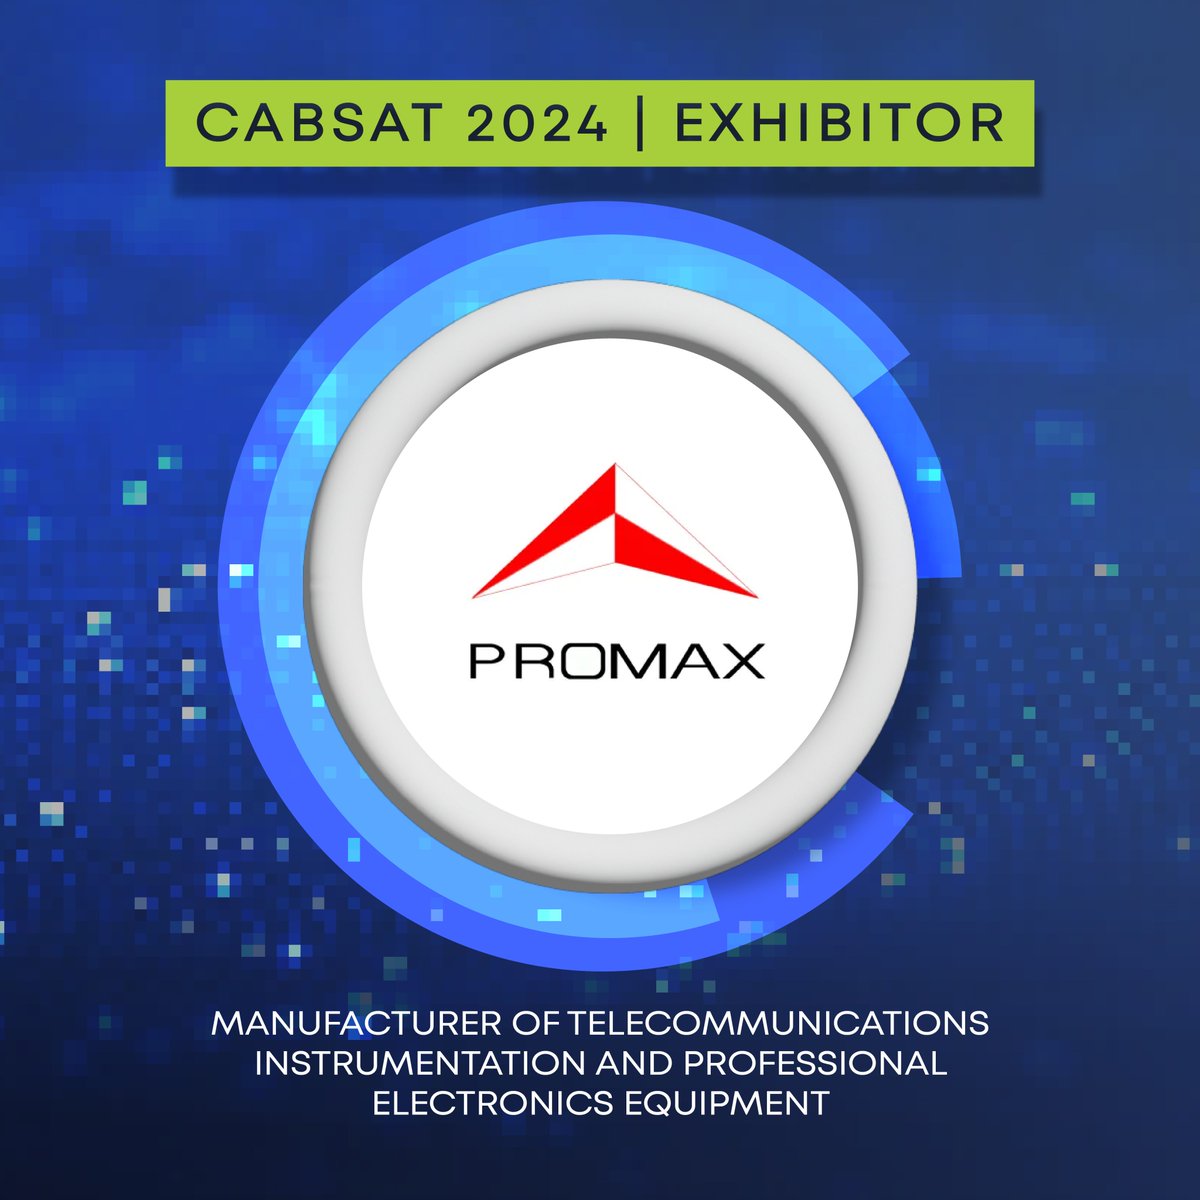 Navigate the broadcasting revolution with #CABSAT 2024 exhibitors — Plura, Plisch, and Promax. 💥 Join us to network with the best in the business who are redefining our industry’s landscape. Register now for your interest to visit: bit.ly/3VqMgl9